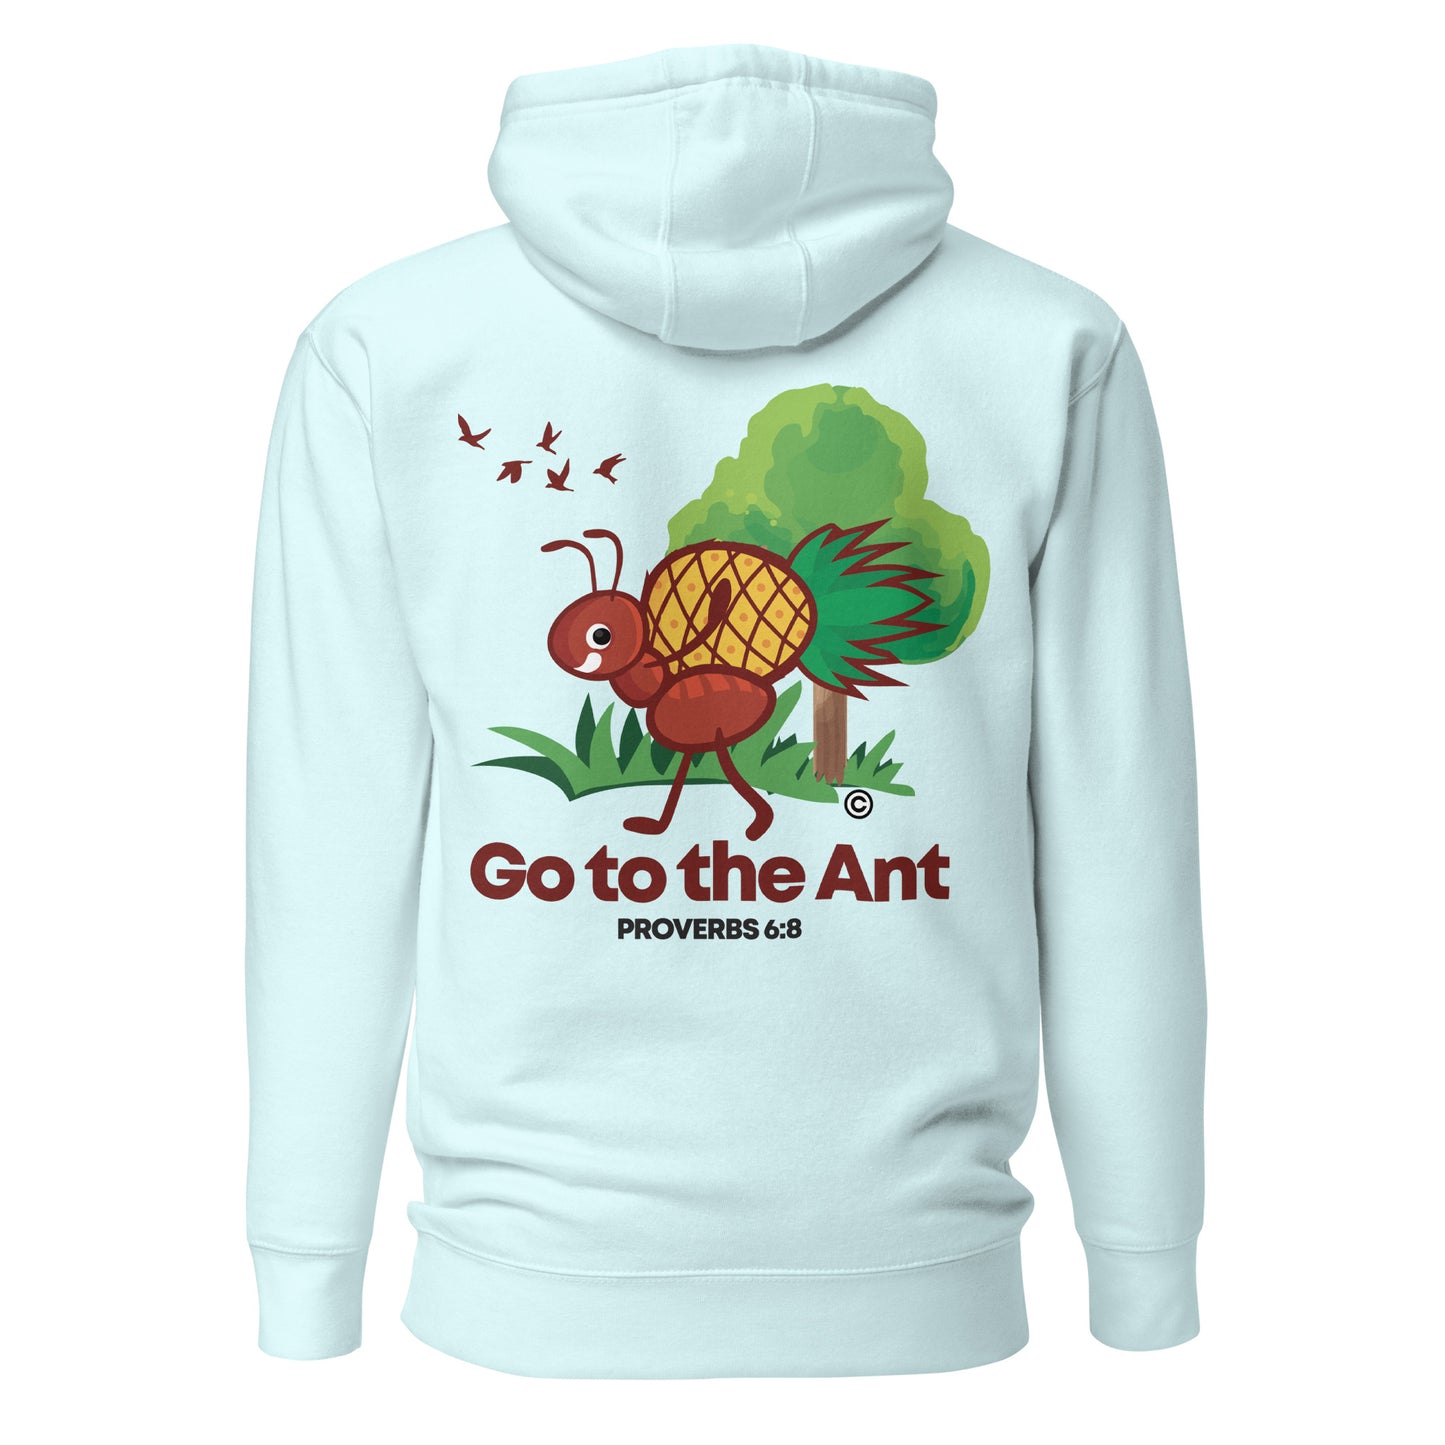 Go to the Ant Women's Hoodie